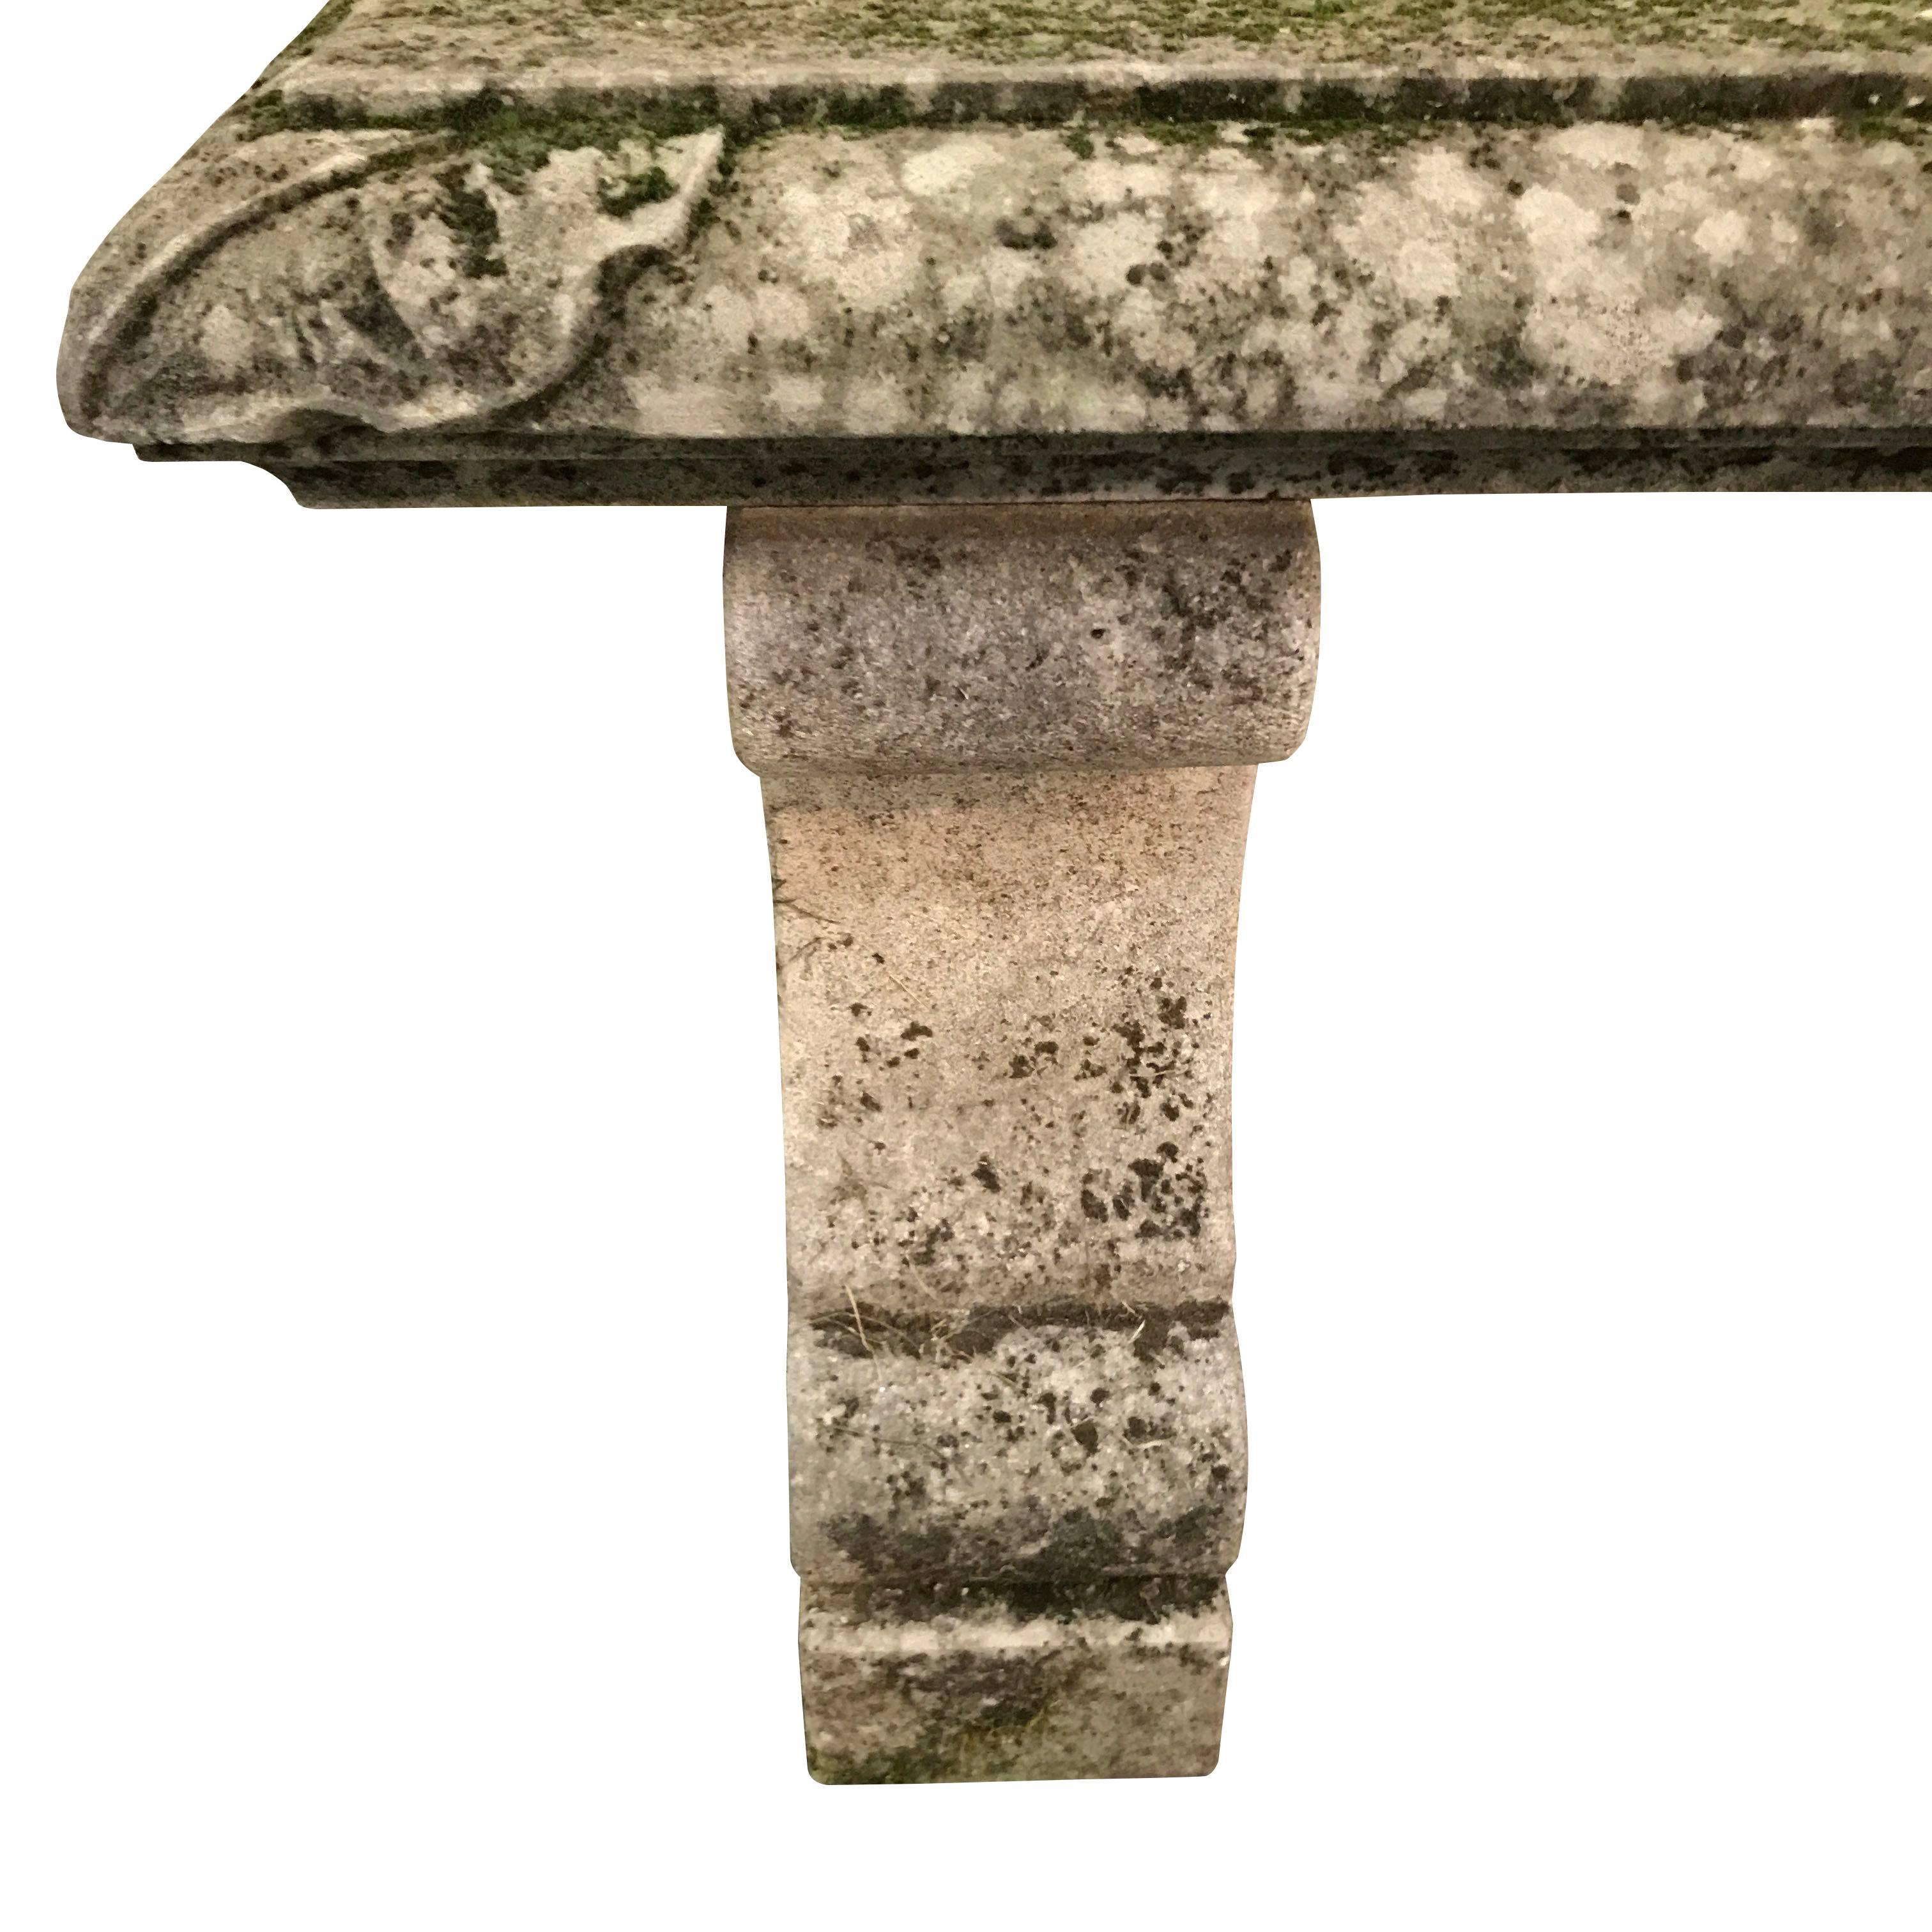 1920s Italian hand-carved Vicenza stone bench with Classic design details.
Moss and spores embedded in stone give naturally aged patina.
Originally from large garden in a villa outside of Venice.
Two available in this size, and one additional